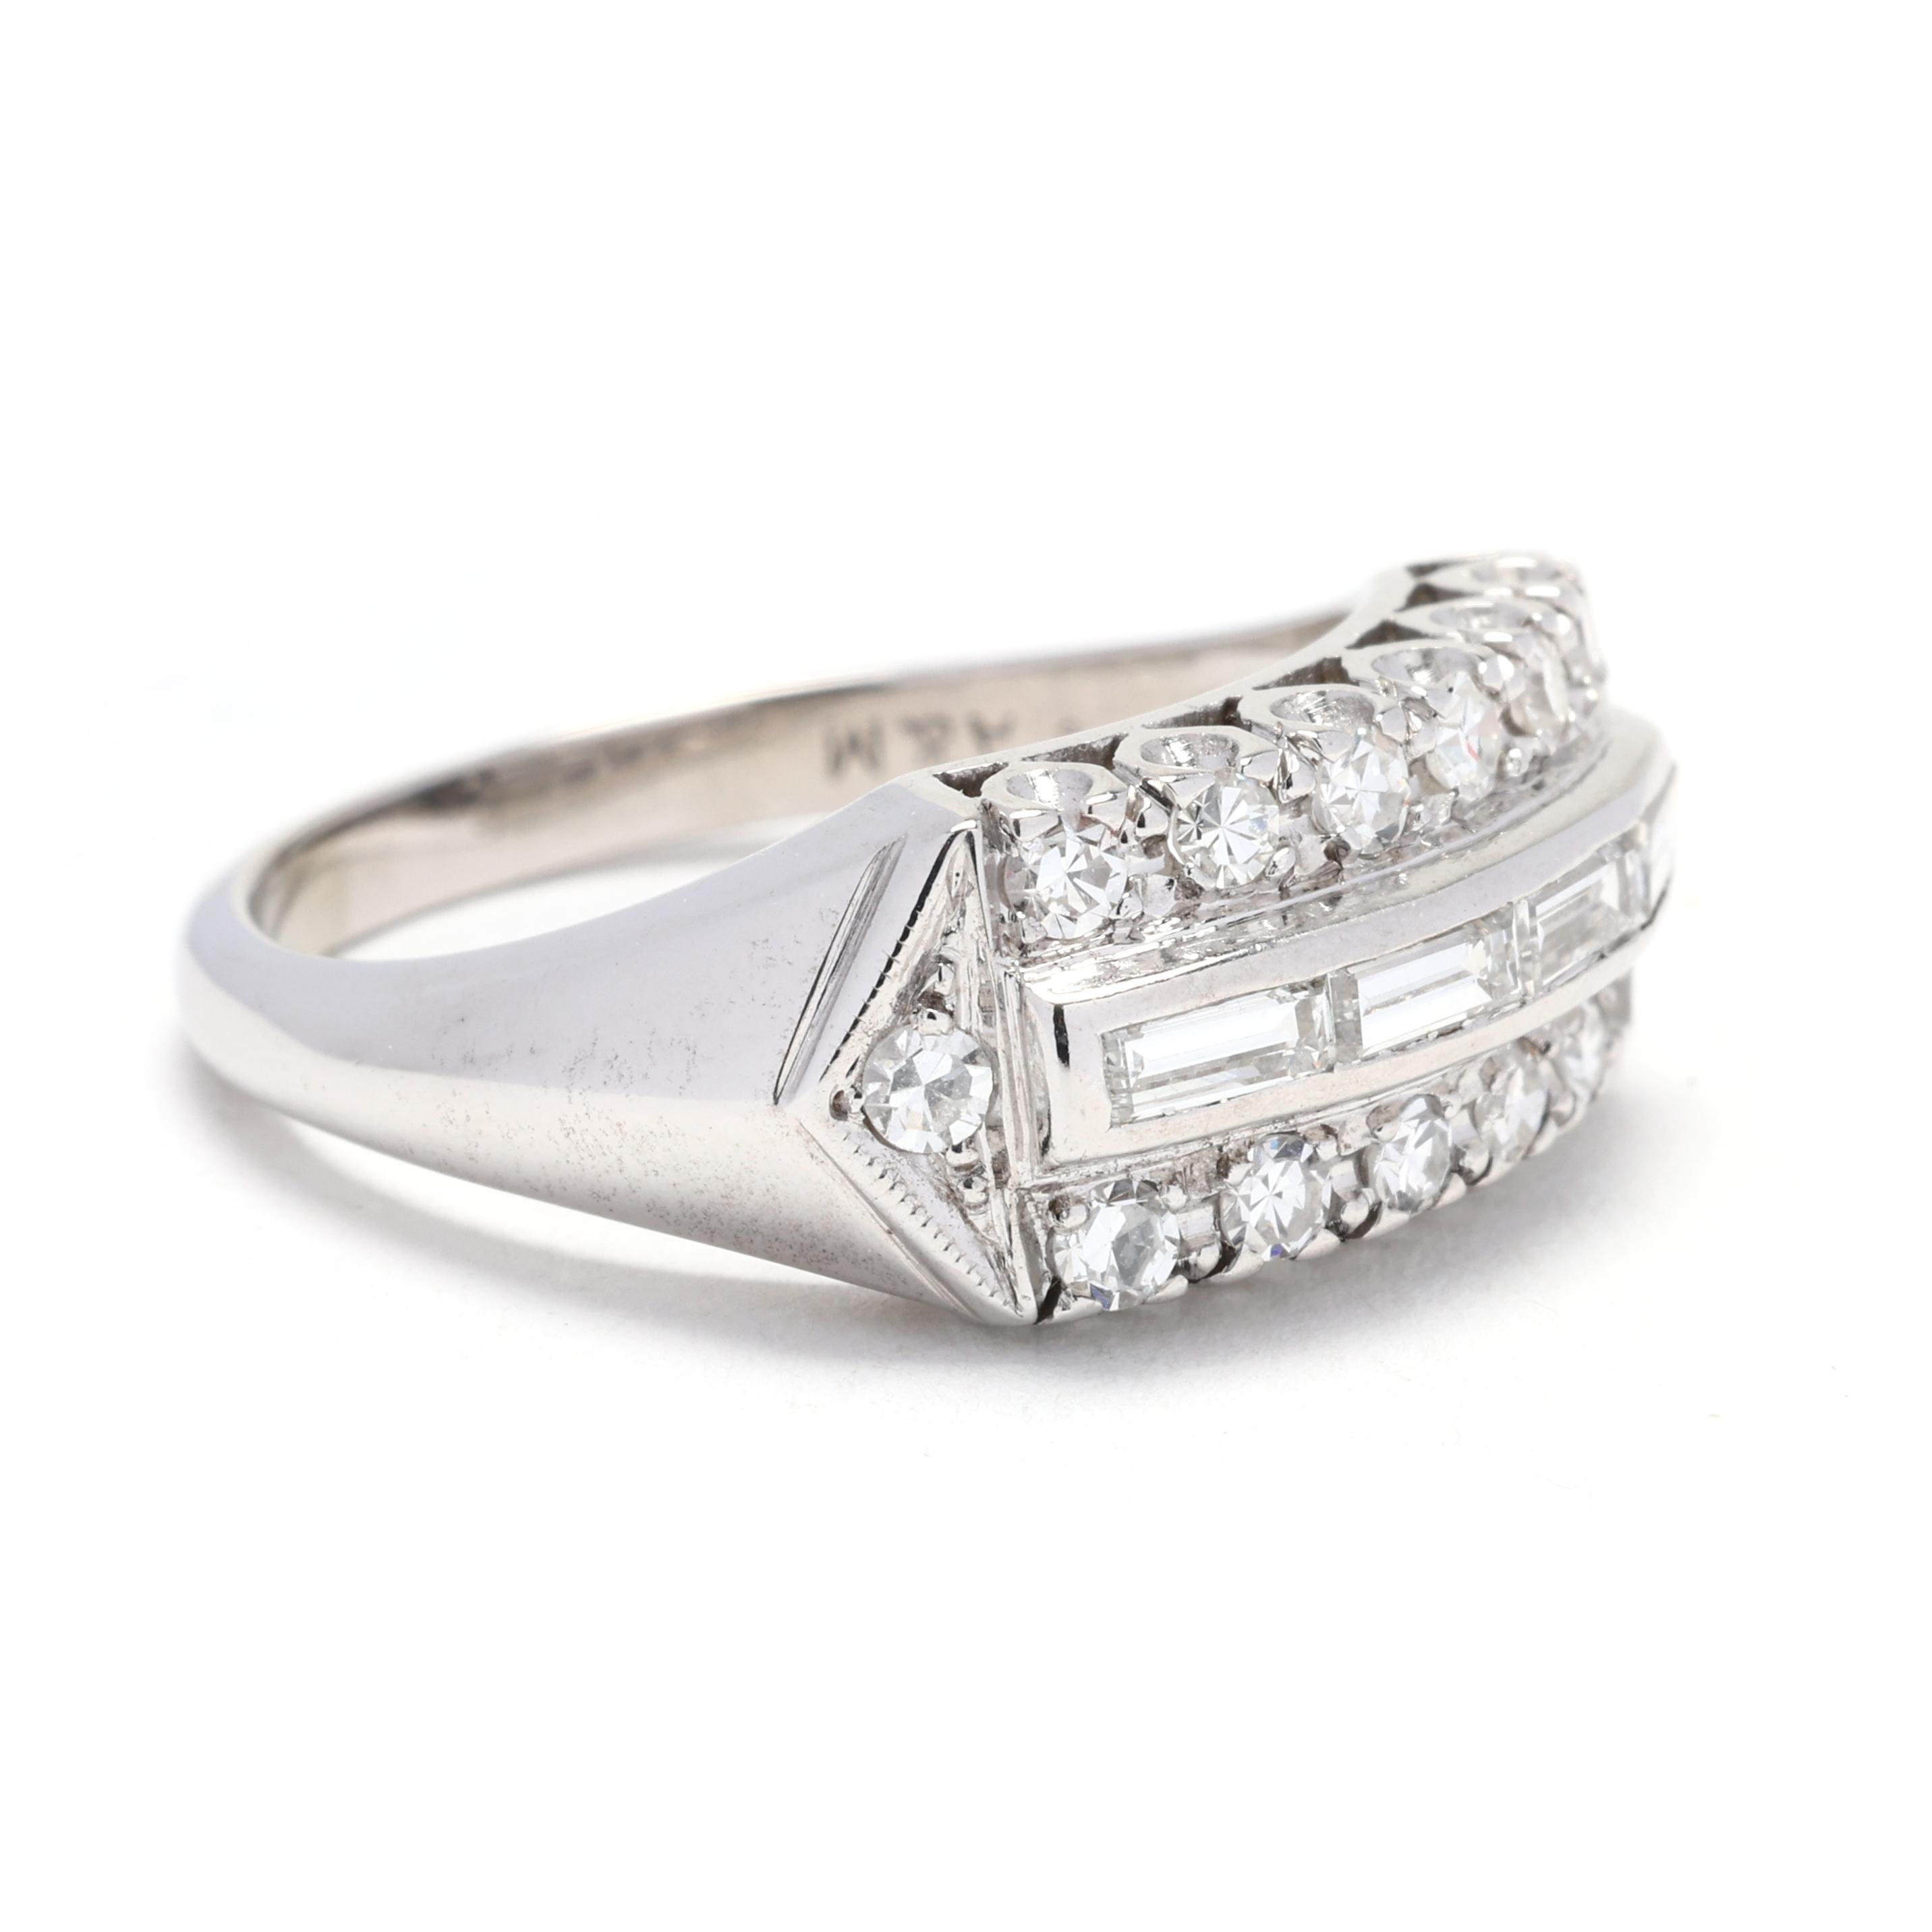 This vintage 1ctw diamond three-row diamond band is a true showstopper. Made with 14k white gold, this ring showcases three rows of sparkling diamonds that add a brilliant and glamorous touch. The diamonds have a total weight of 1ctw, creating a